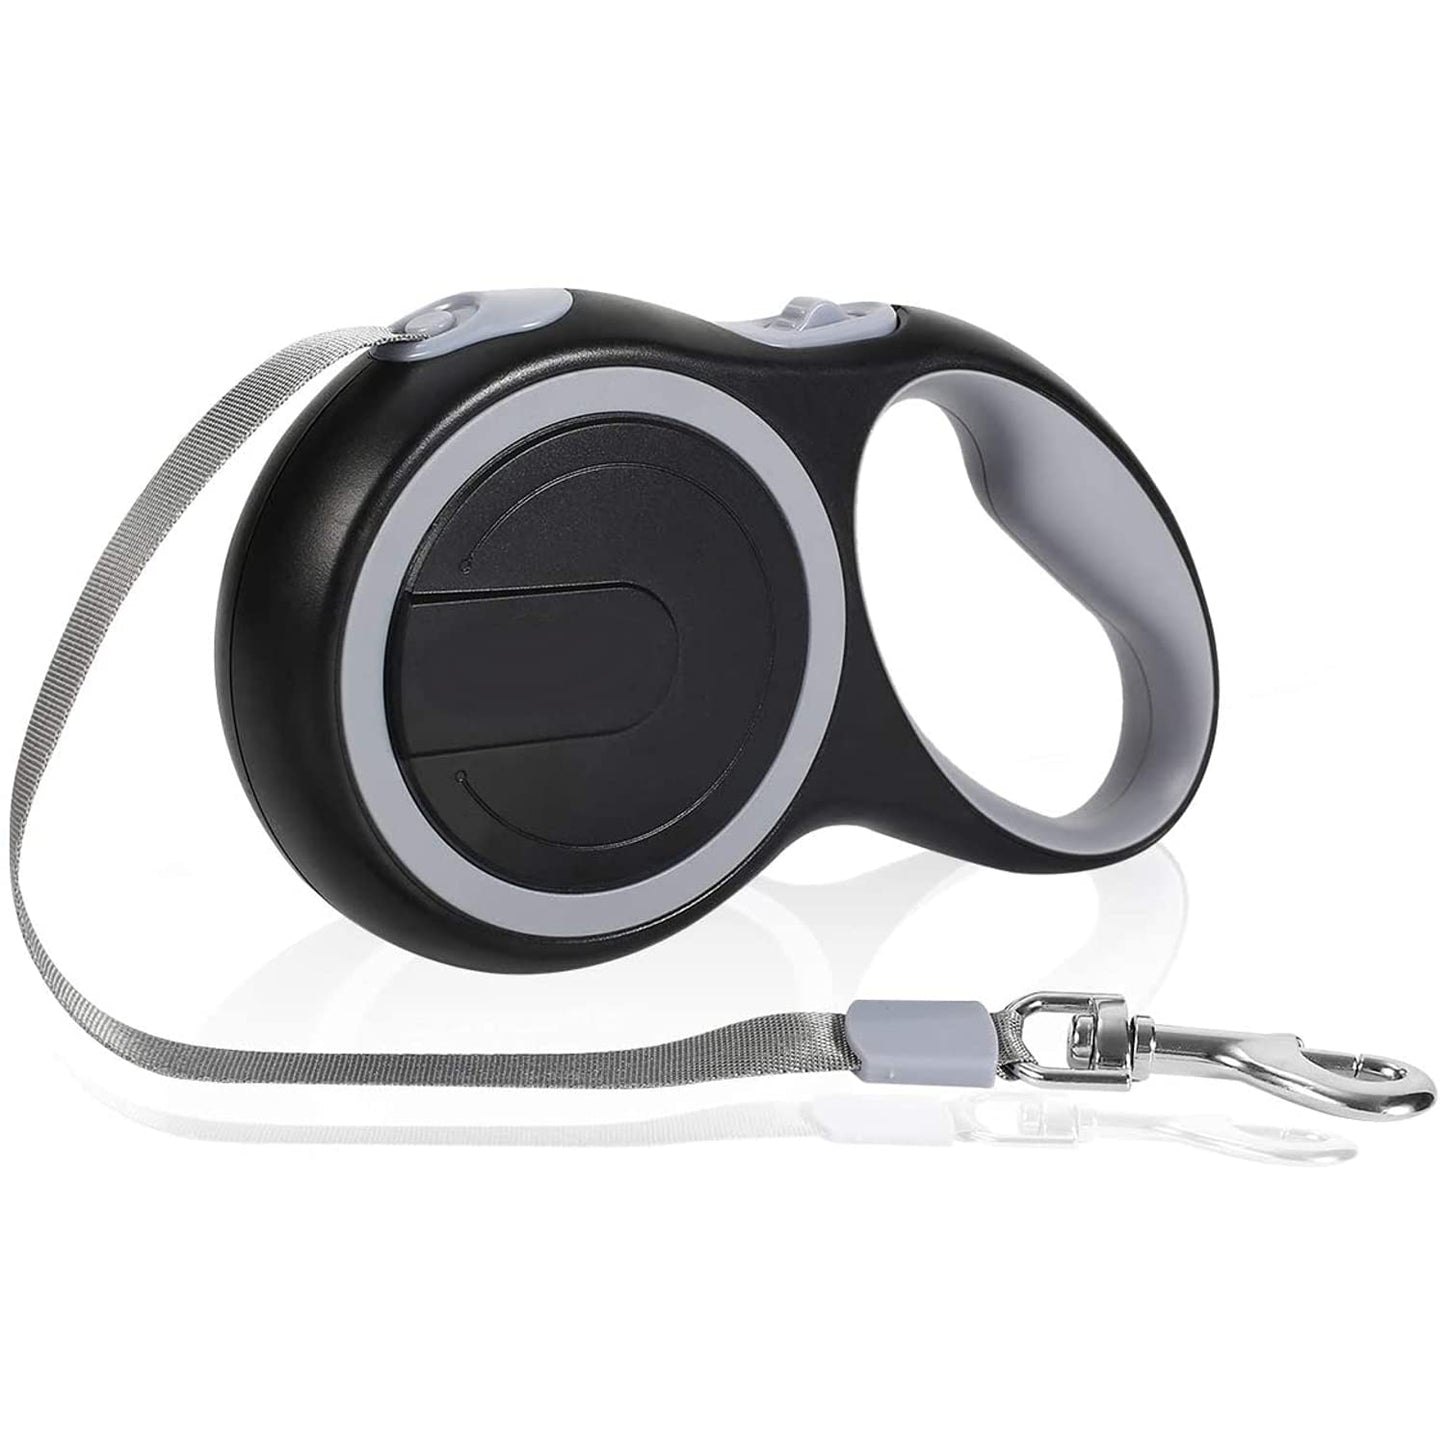 Retractable Dog Leash Pause and Lock with One Hand Brake System